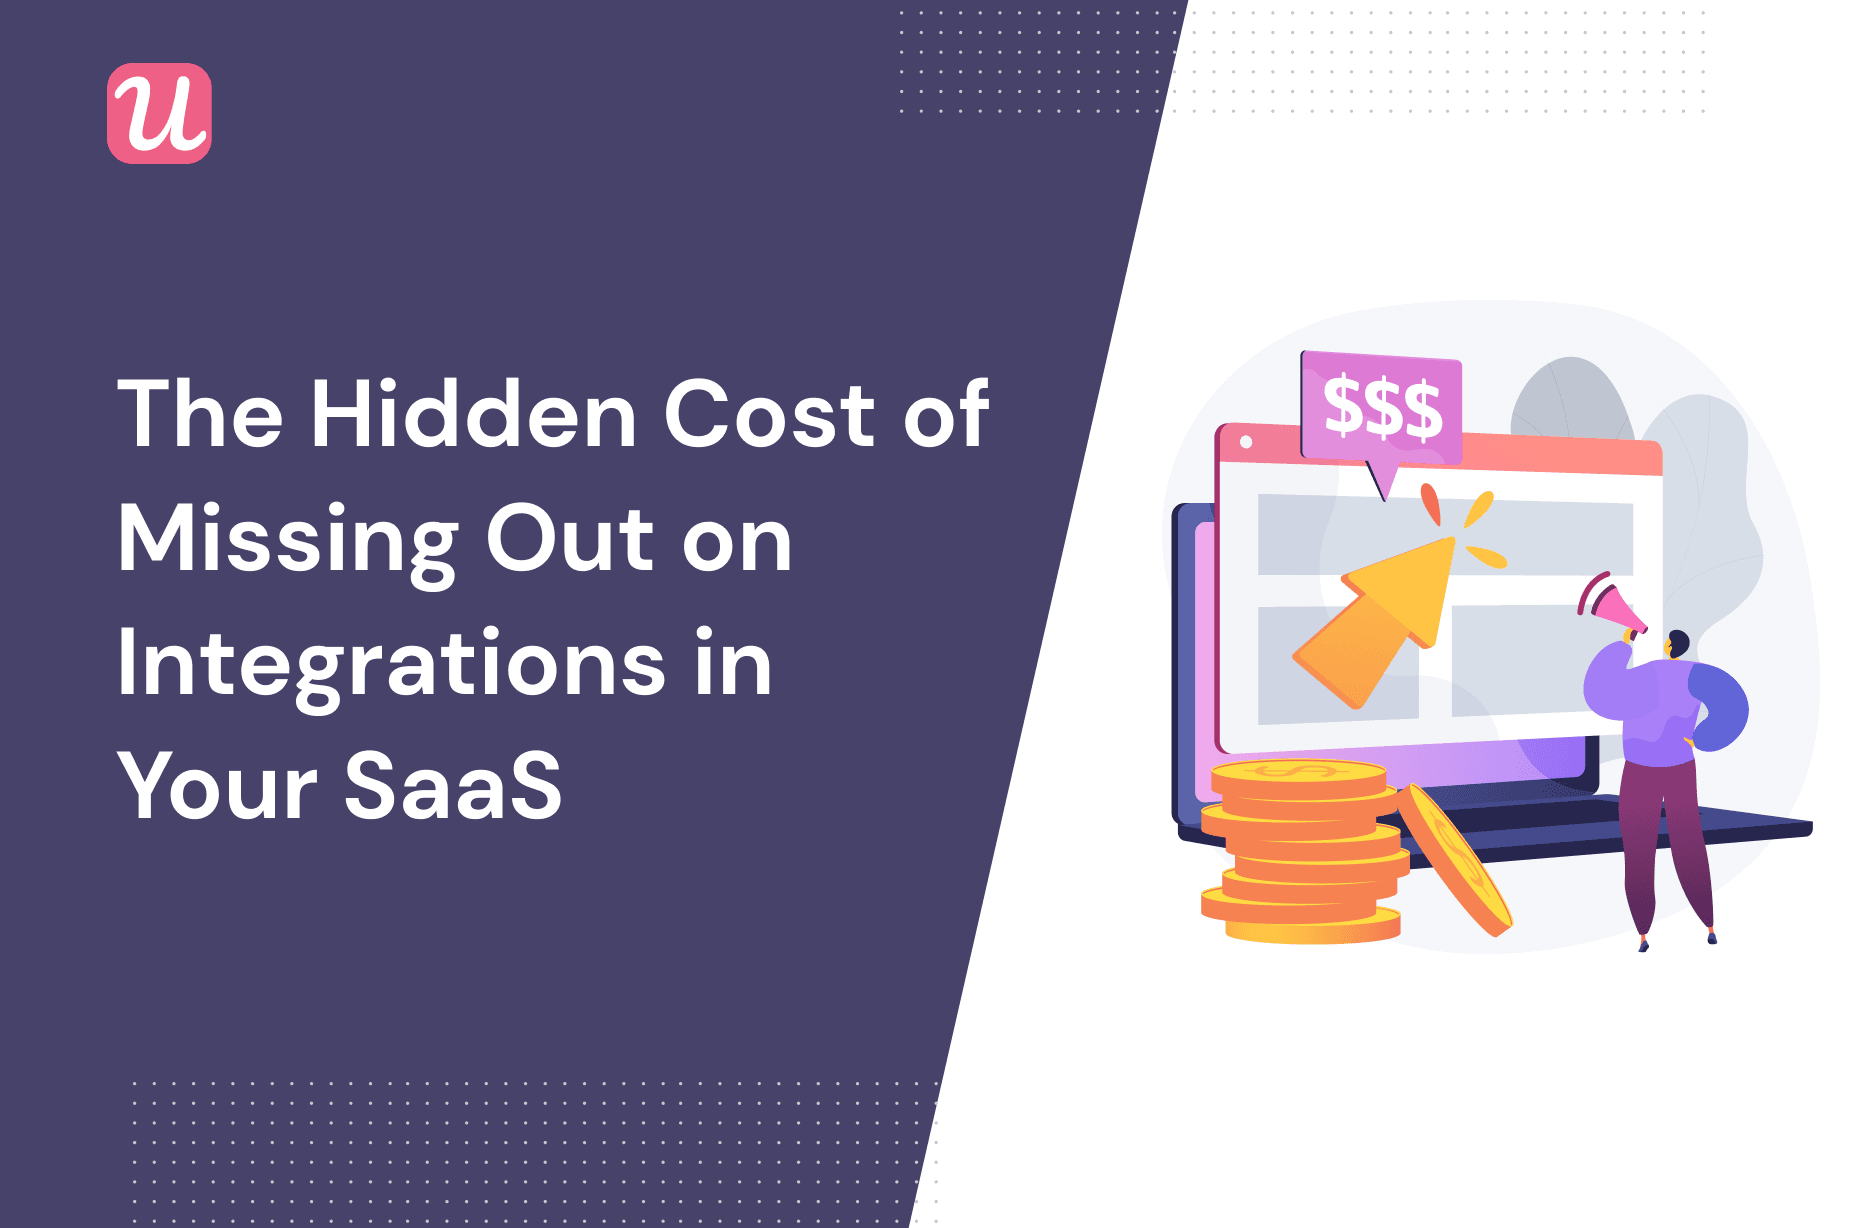 The Hidden Cost of Missing Out on Integrations in Your SaaS